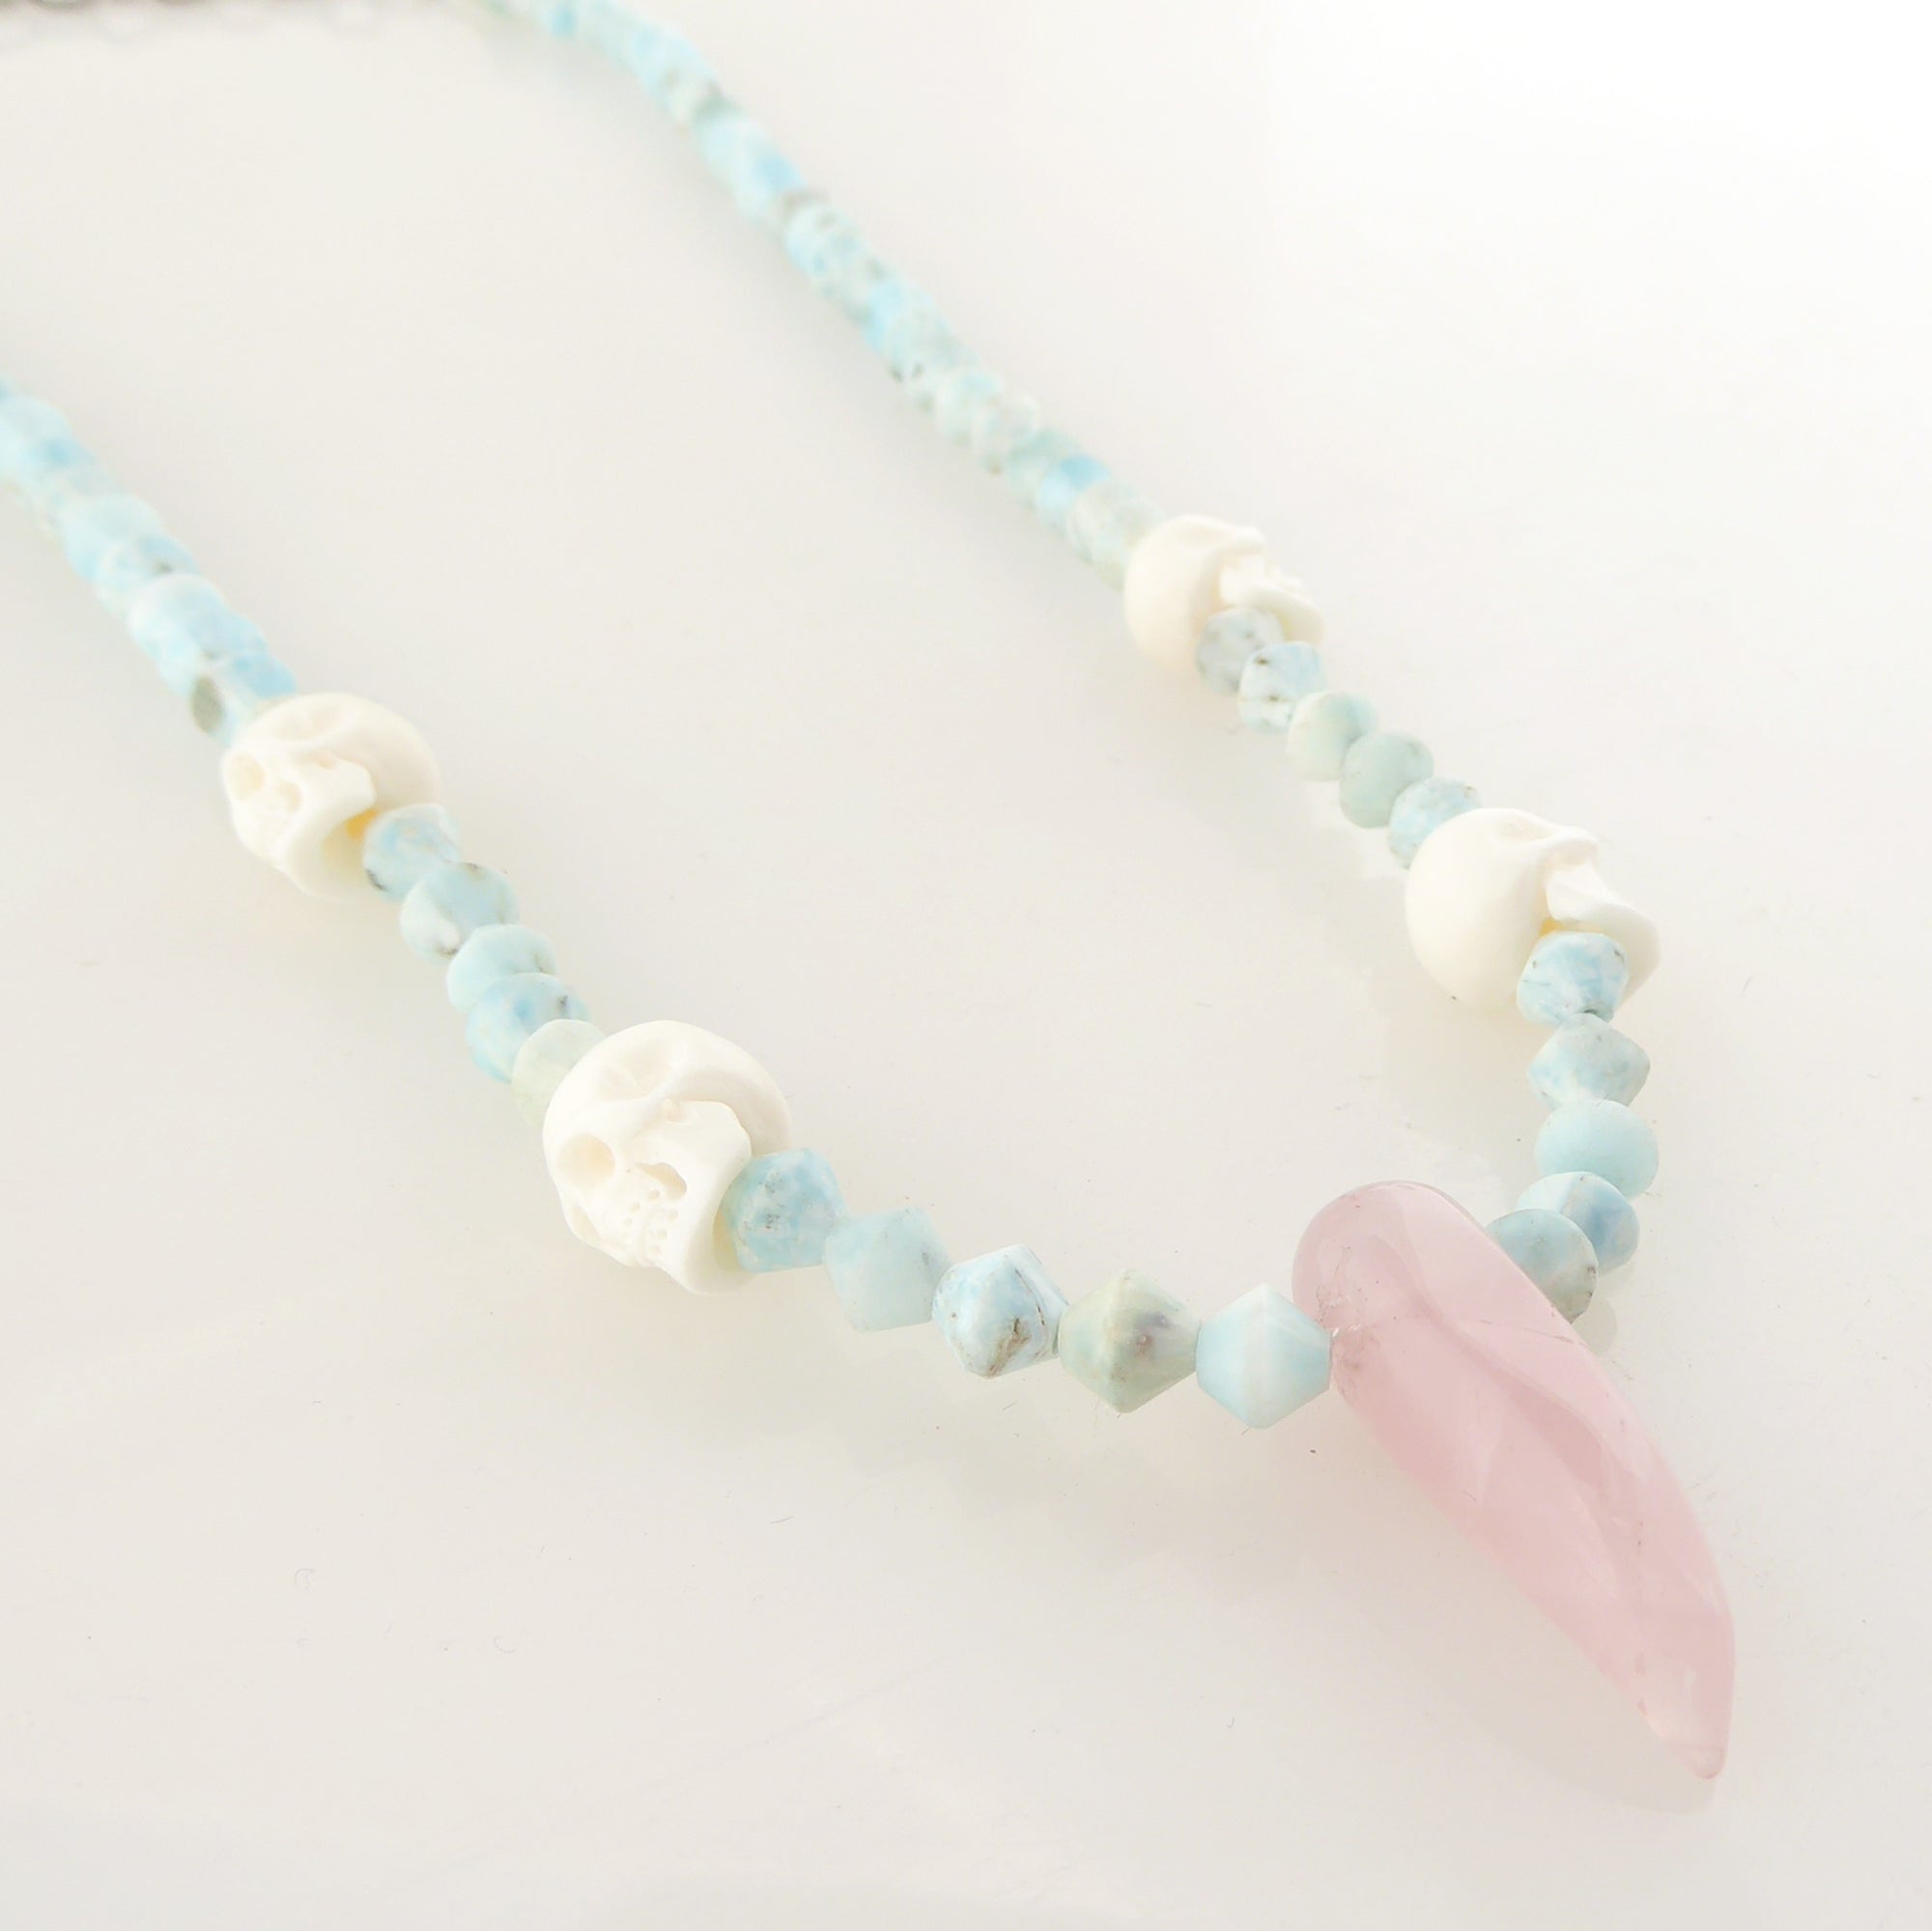 Rose quartz and carved skull necklace by Jenny Dayco 2